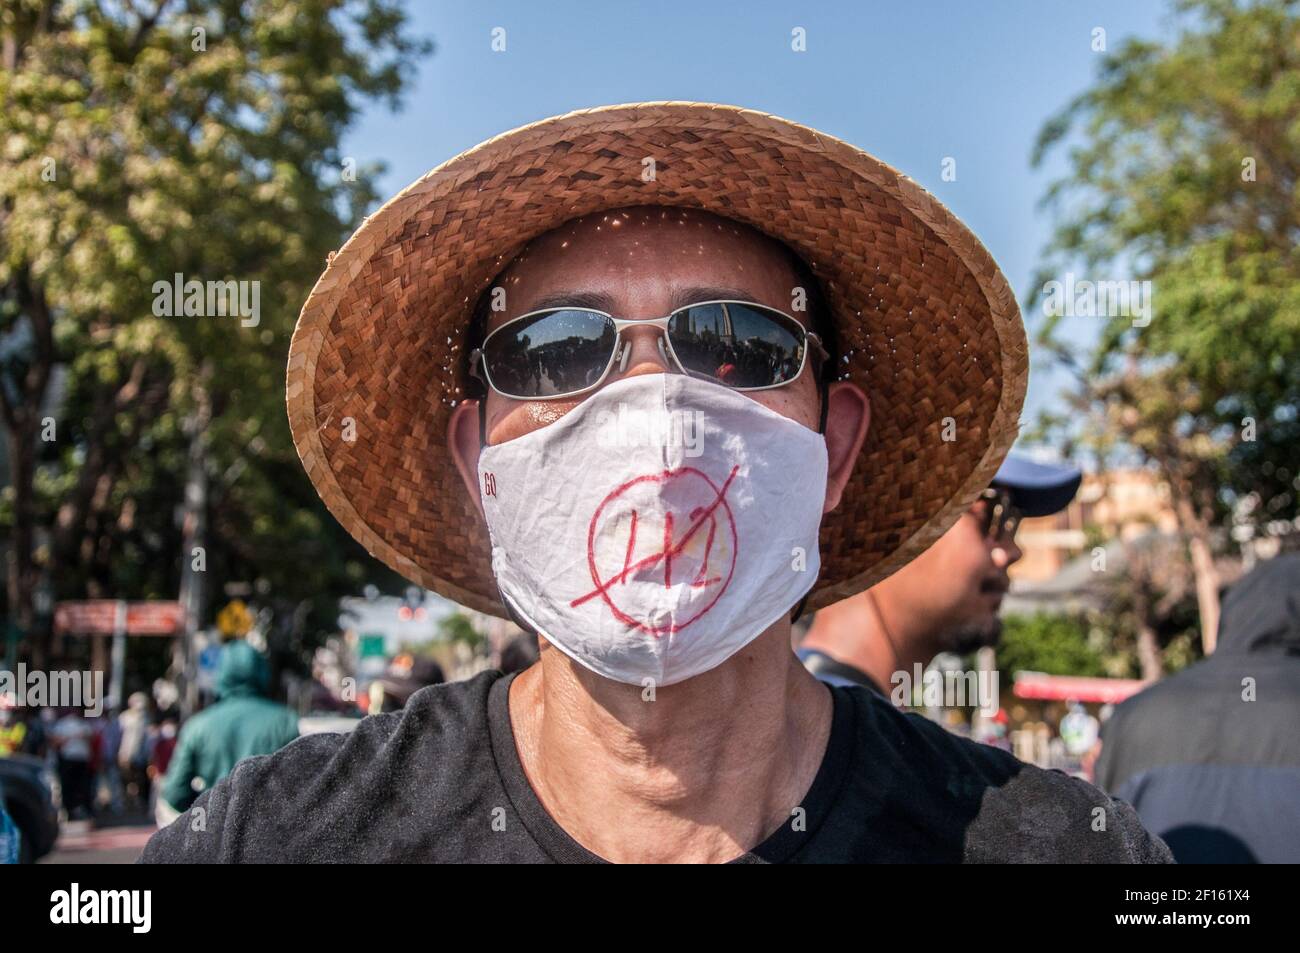 A protester wearing a face mask with a protest message during the demonstration. A group of pro-democracy protesters, on an almost 250 kilometer walk arrived in Bangkok on 7 March. The group was led by Jatupat Boonpattararaksa also known as 'Pai Daodin' or 'Pai' a pro-democracy activist who has been walking for 20 days starting from the Thao Suranaree statue in Nakhon Rachasima province on 16 February 2021 to The Democracy Monument in Bangkok on 7 March 2021 to protest the imprisonment of 4 pro-democracy activists (Somyot Pruksakasemsuk, Patiwat Saraiyam, Parit 'Penguin' Chivarak and Anon Namp Stock Photo